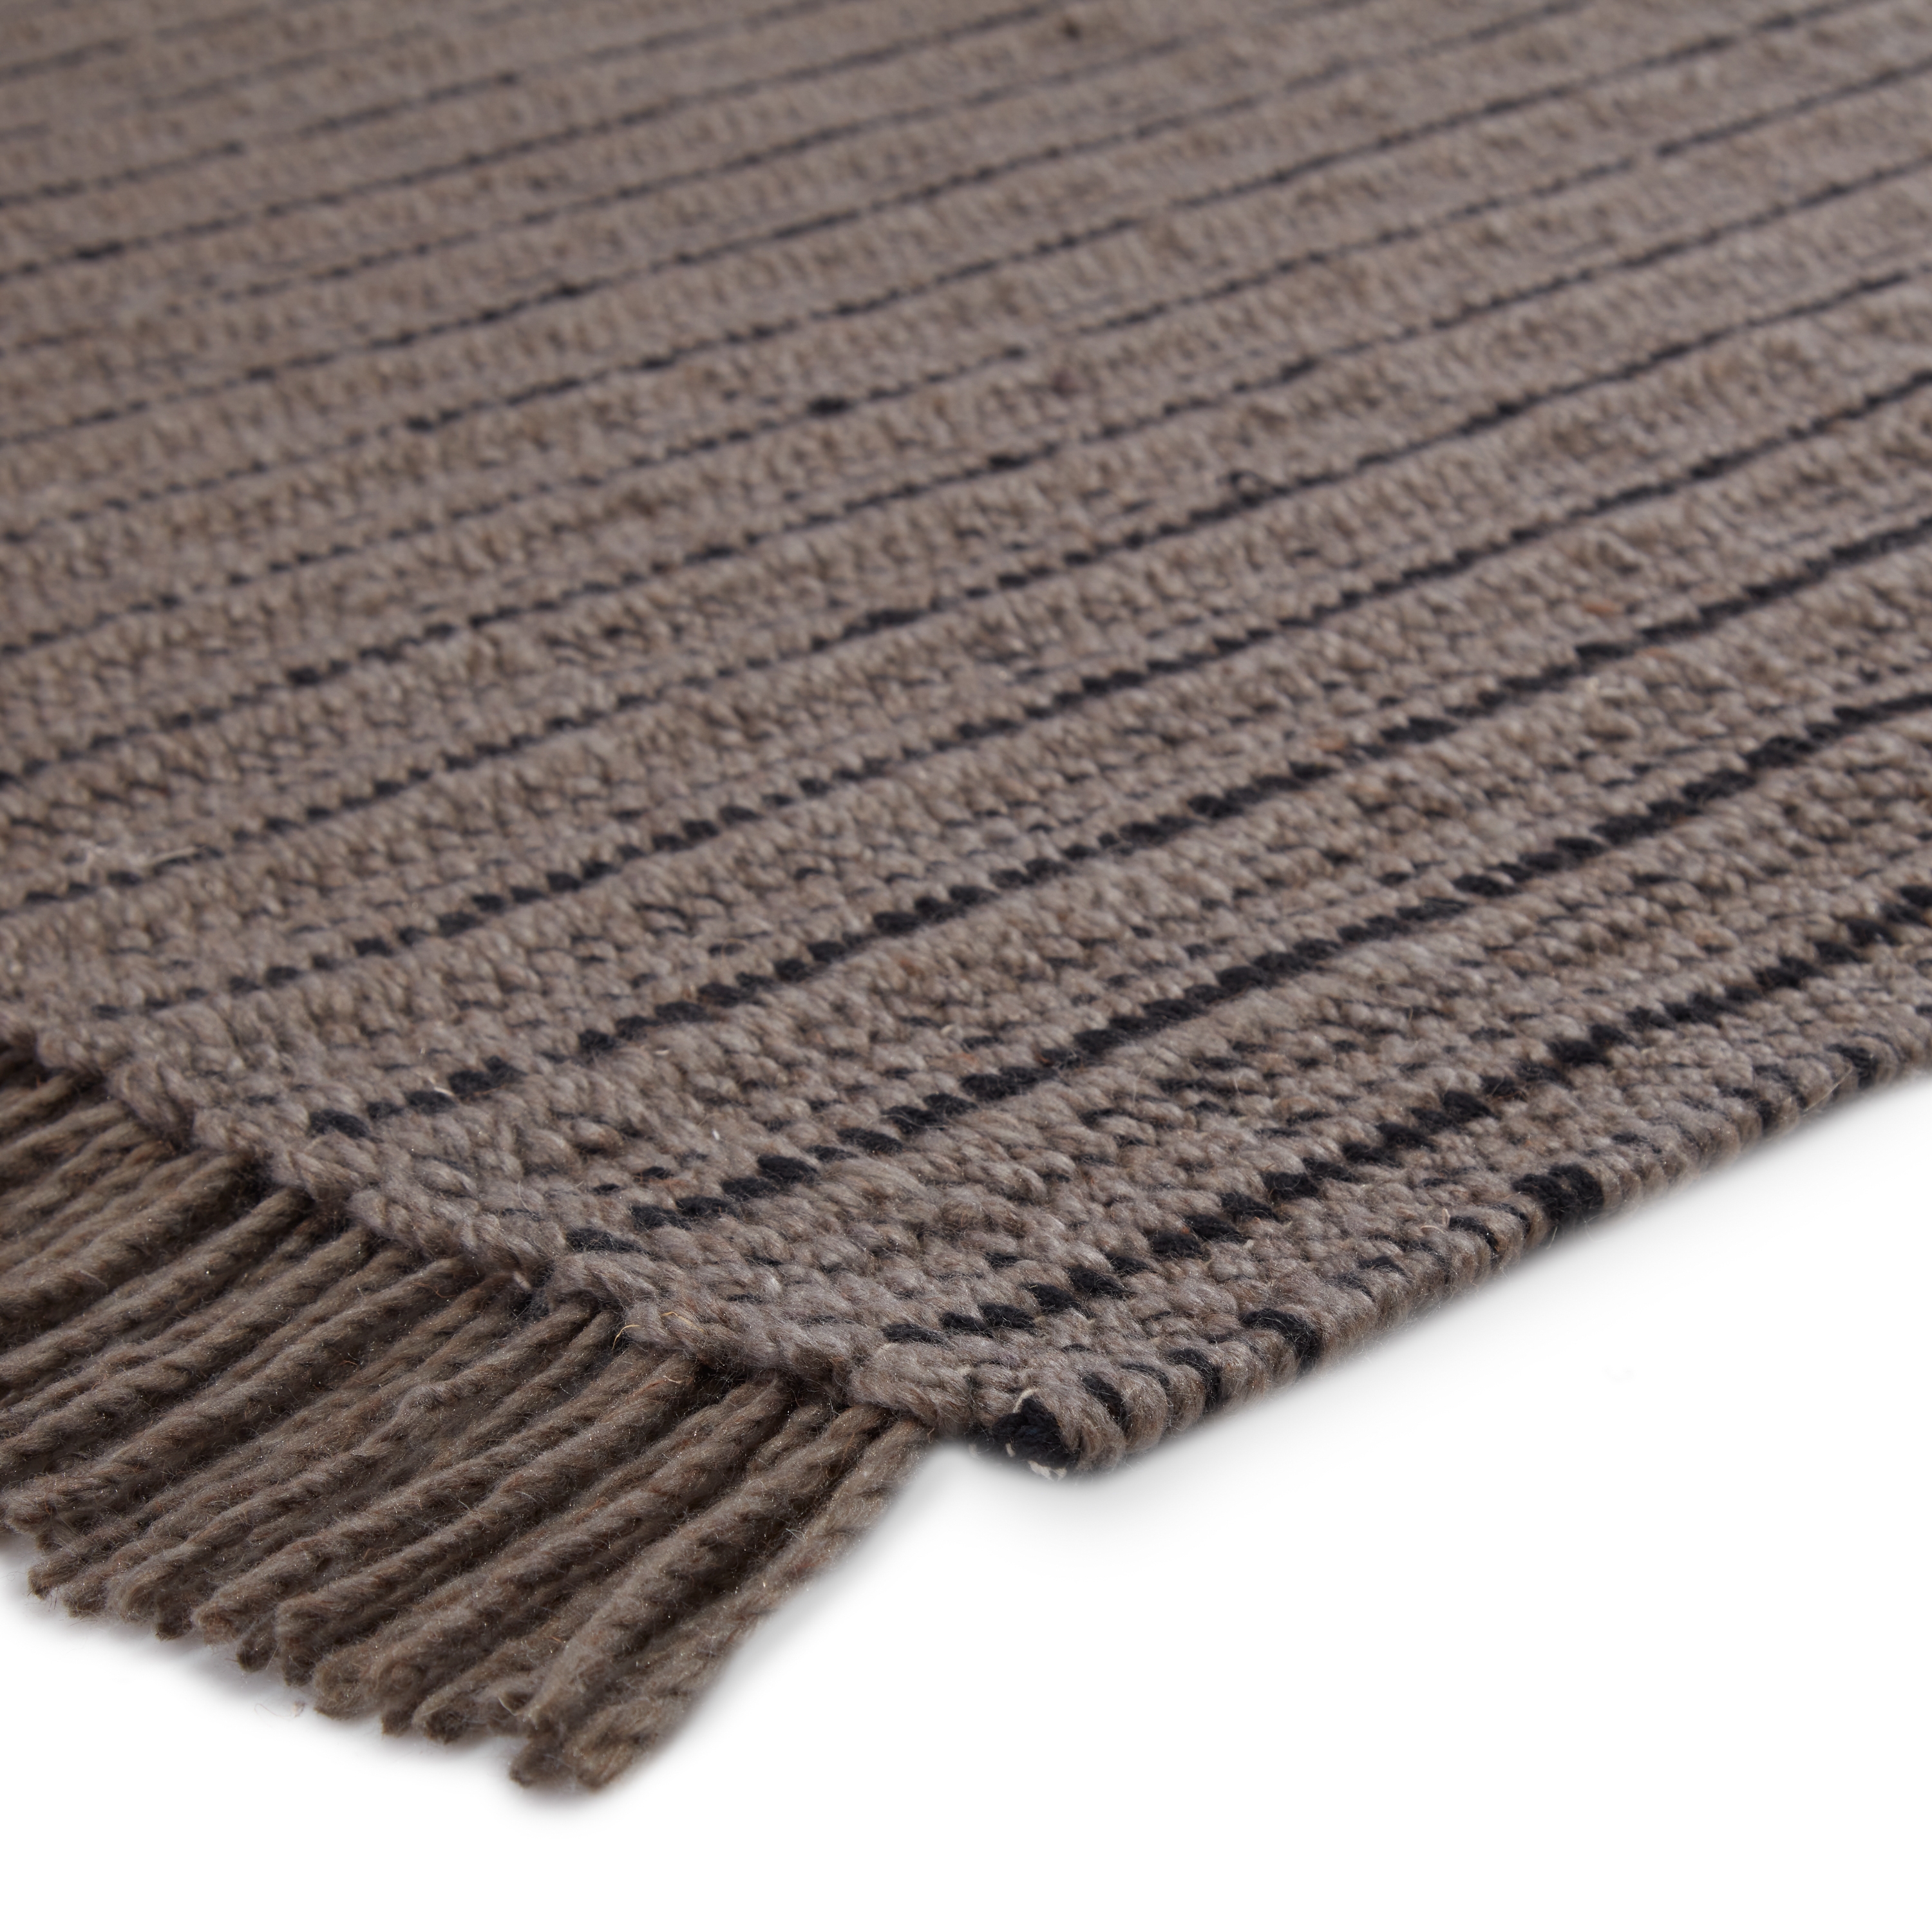 Poise Handwoven Solid Gray/ Black Area Rug (8'X10') - Image 1